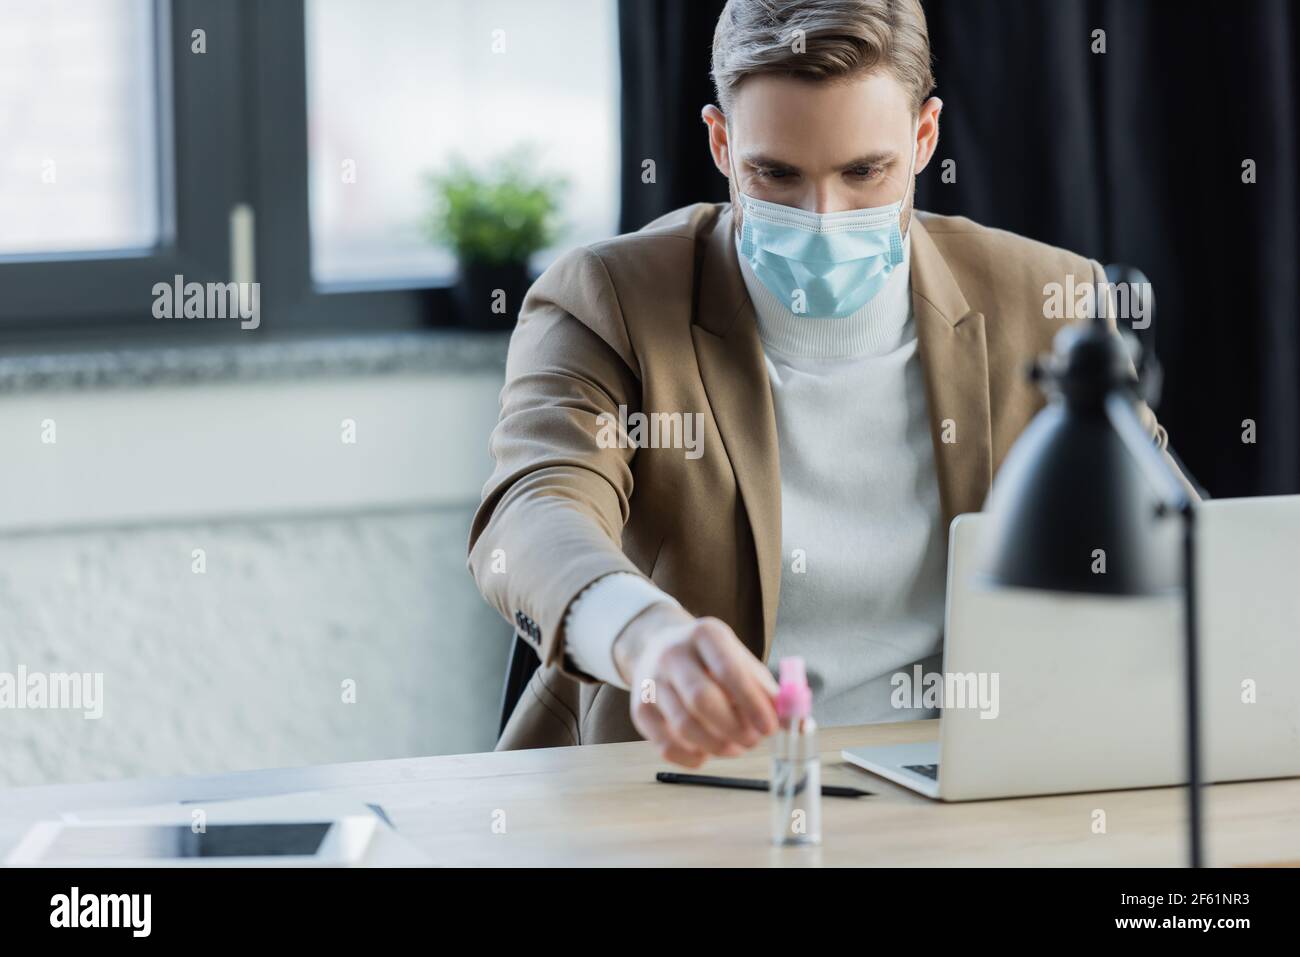 young businessman in medical mask taking antiseptic while sitting at workplace Stock Photo